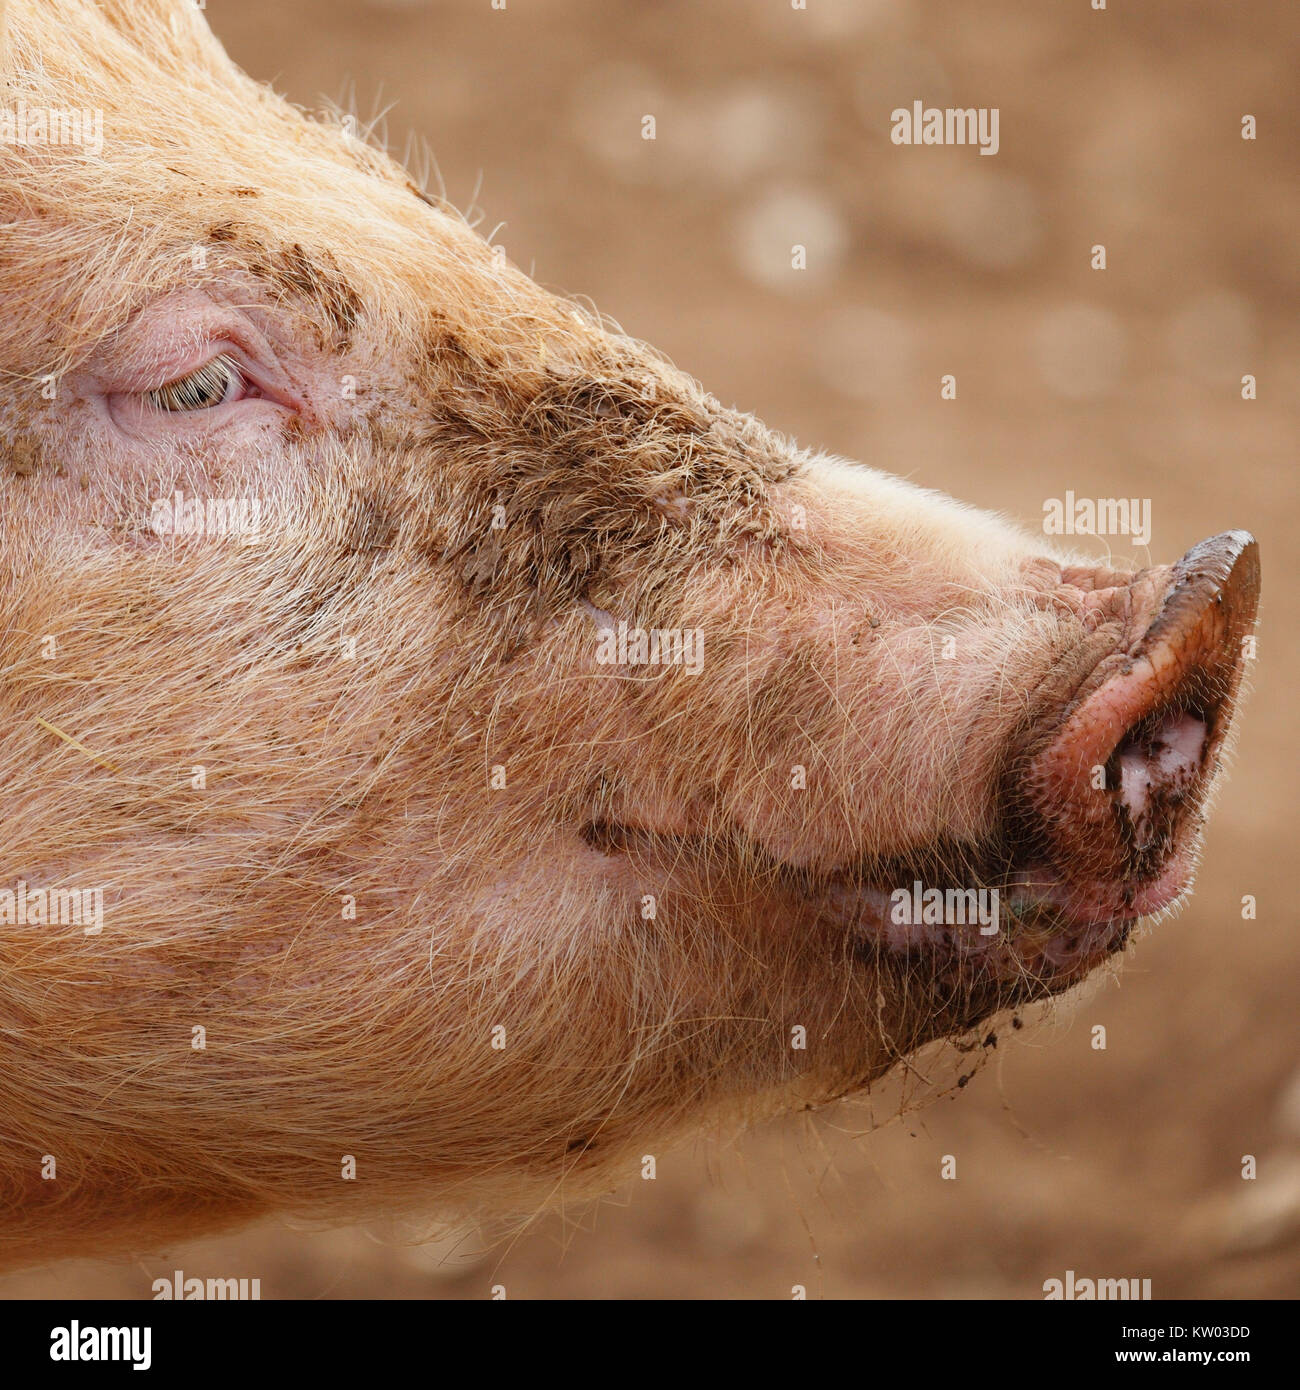 Portrait of a pig's face. Stock Photo